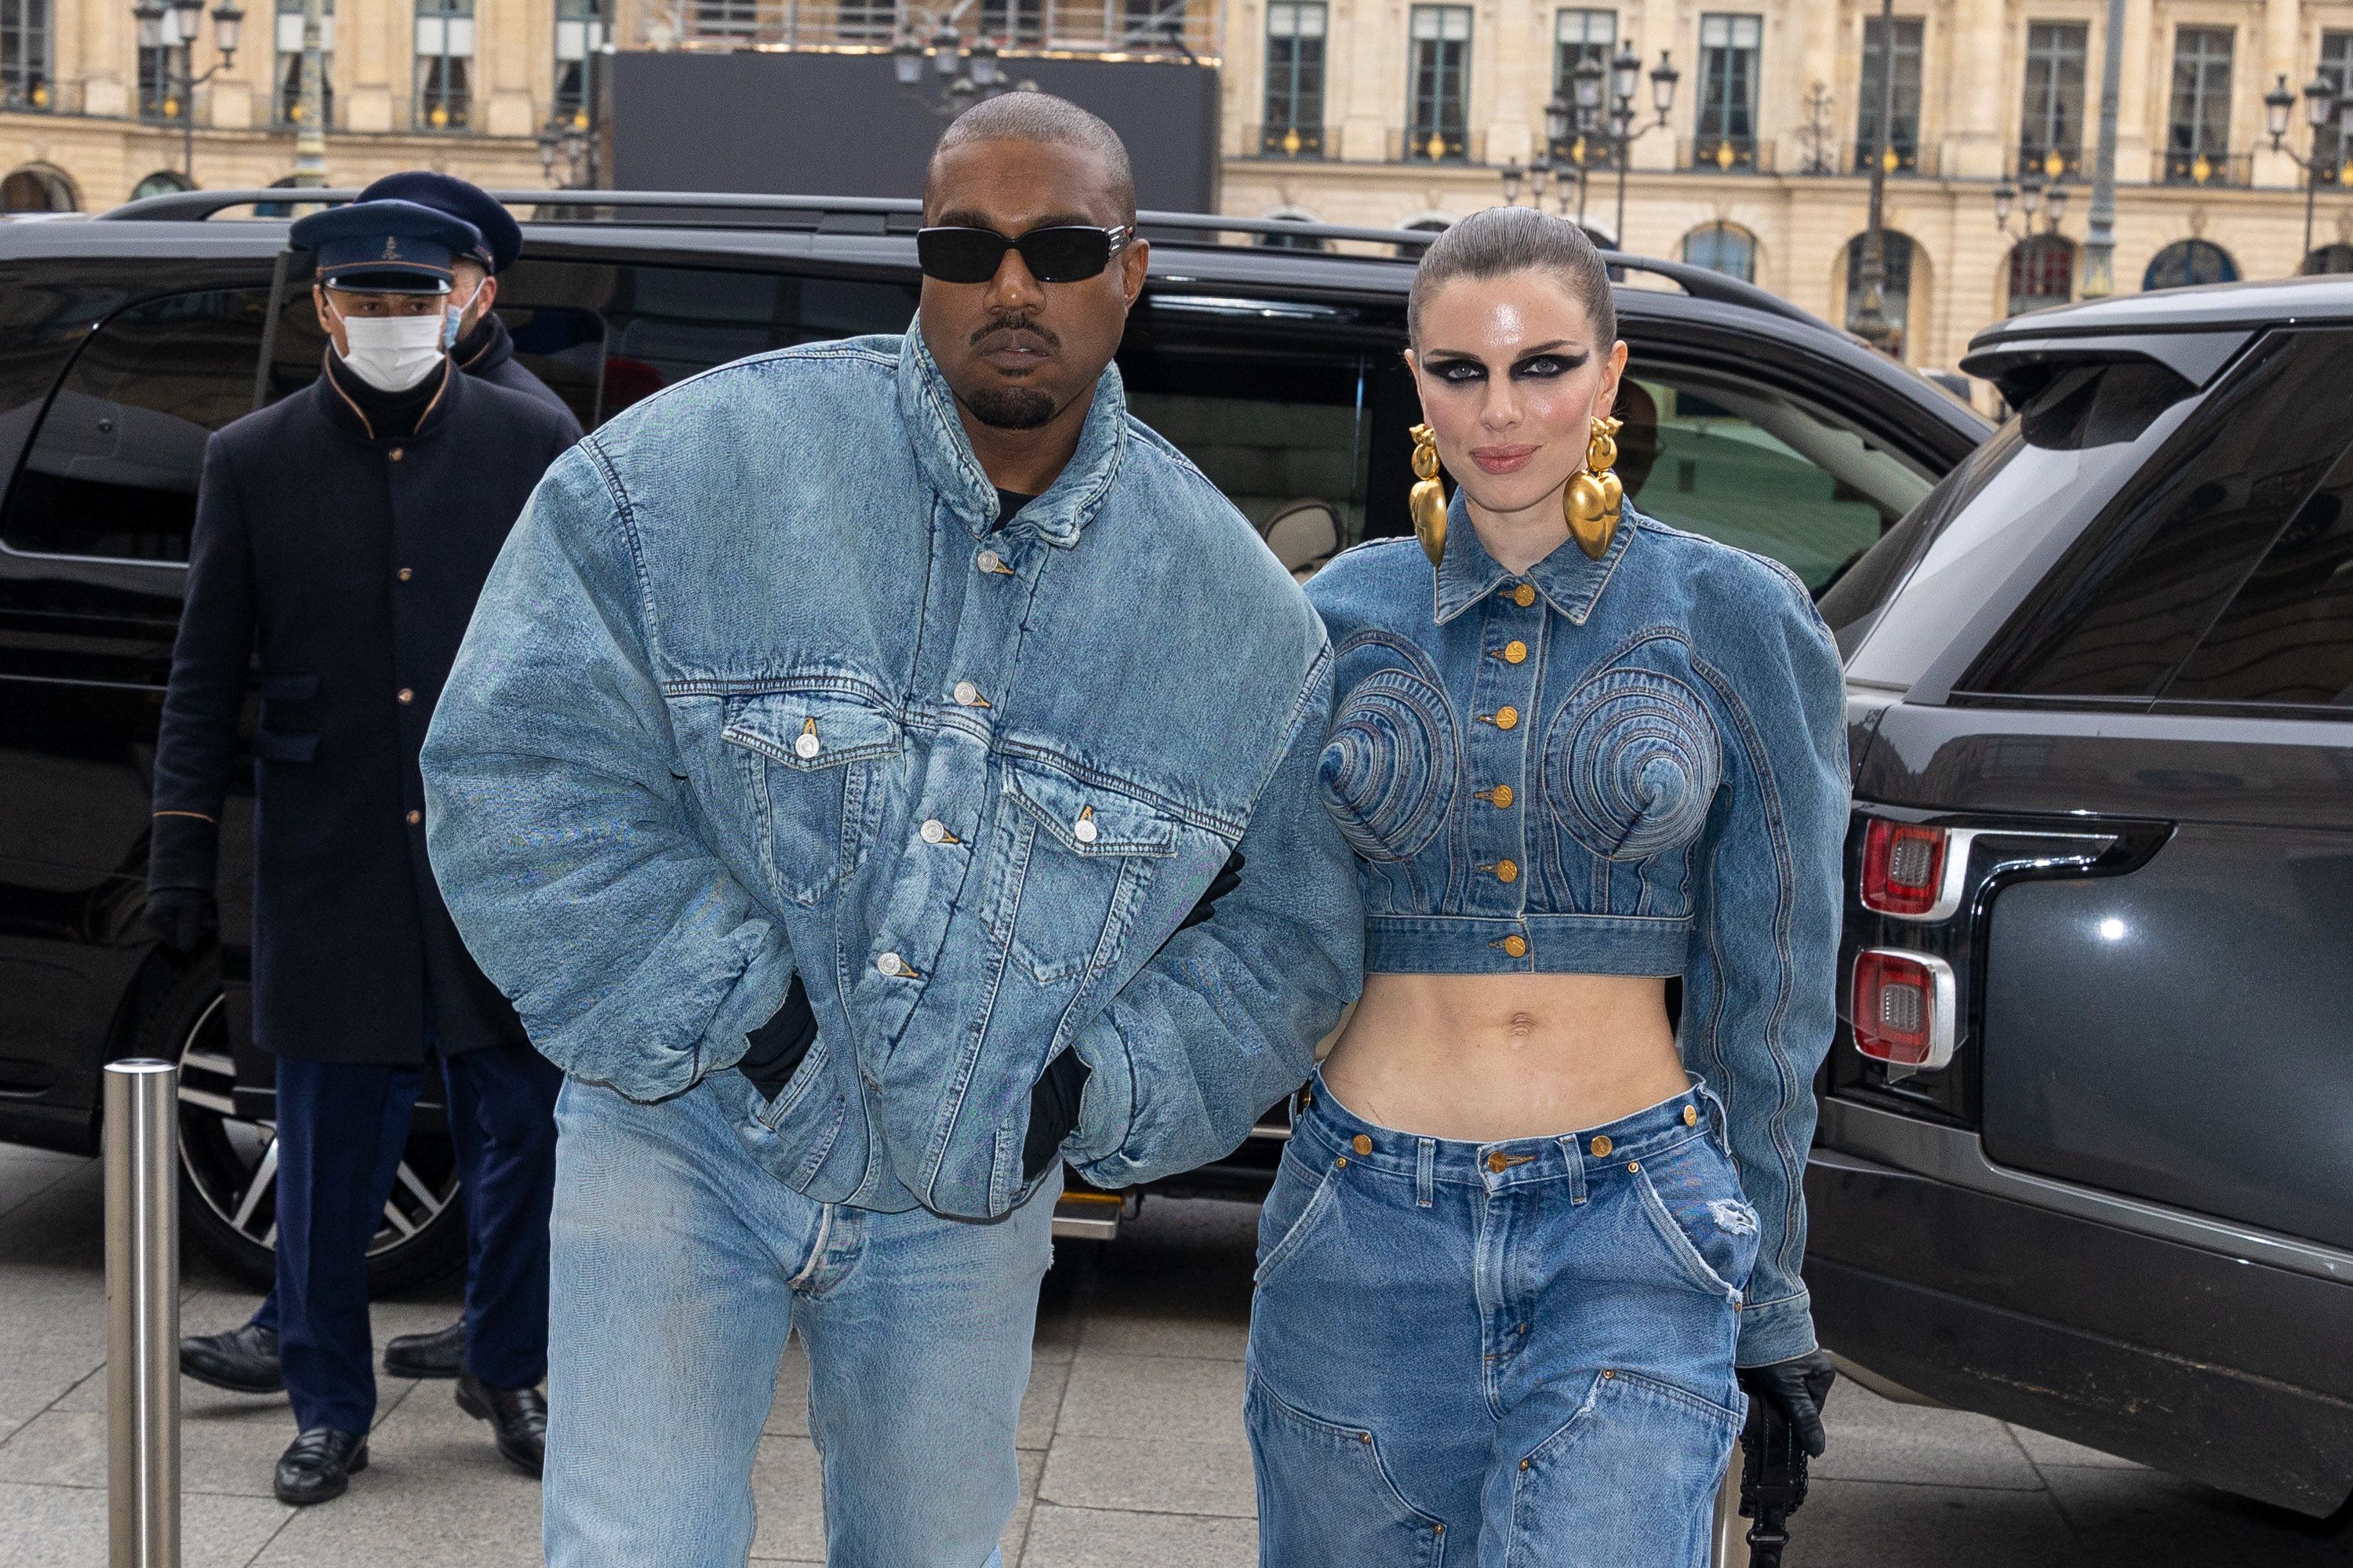 Close-up of Ye and Julia standing together and wearing denim